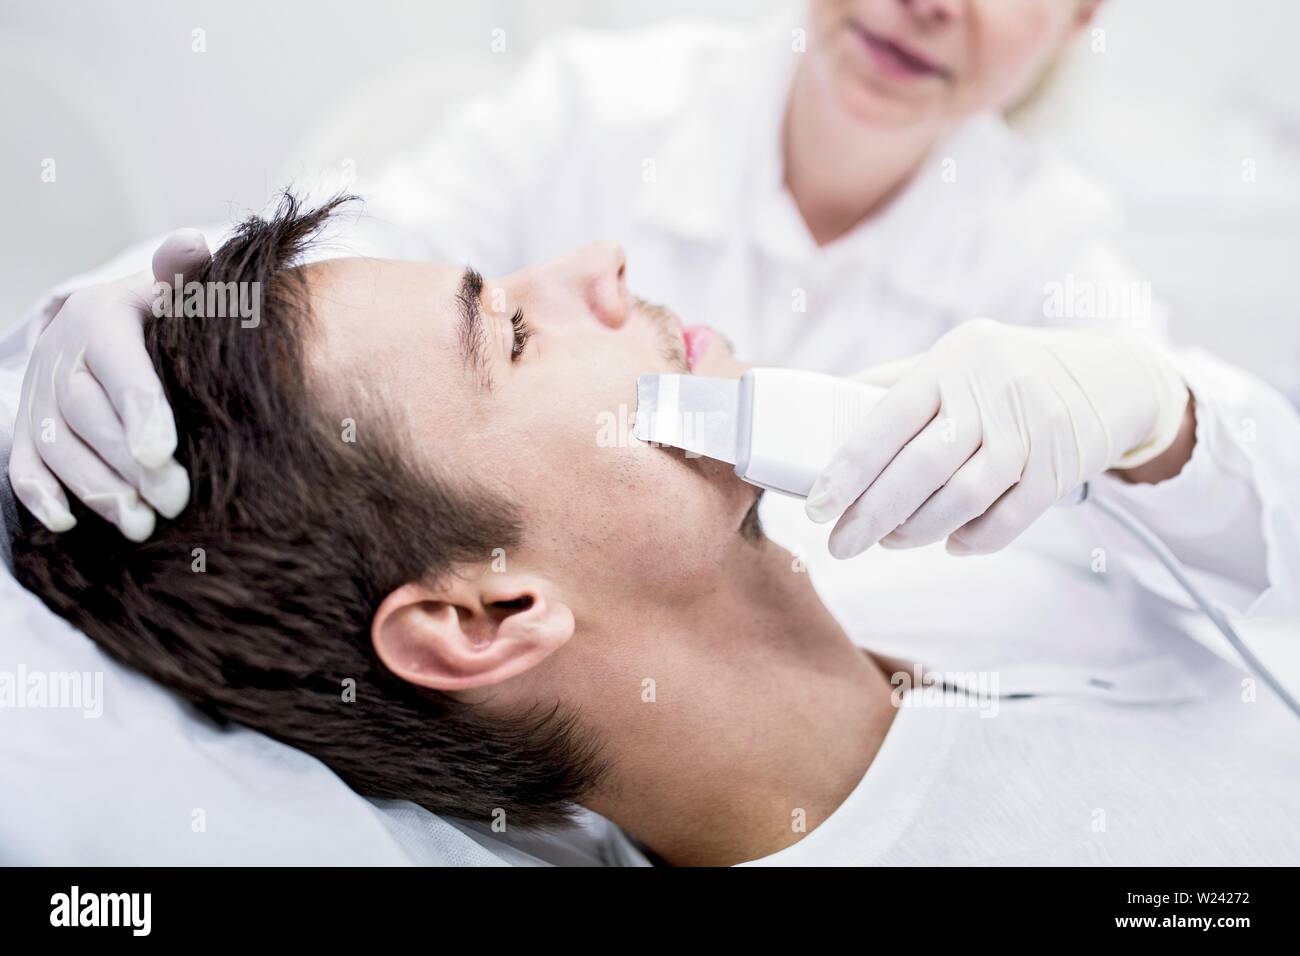 Dermatologist applying facial microdermabrasion treatment on man in clinic, close-up. The cosmetic procedure uses micro crystals to remove dead skin c Stock Photo